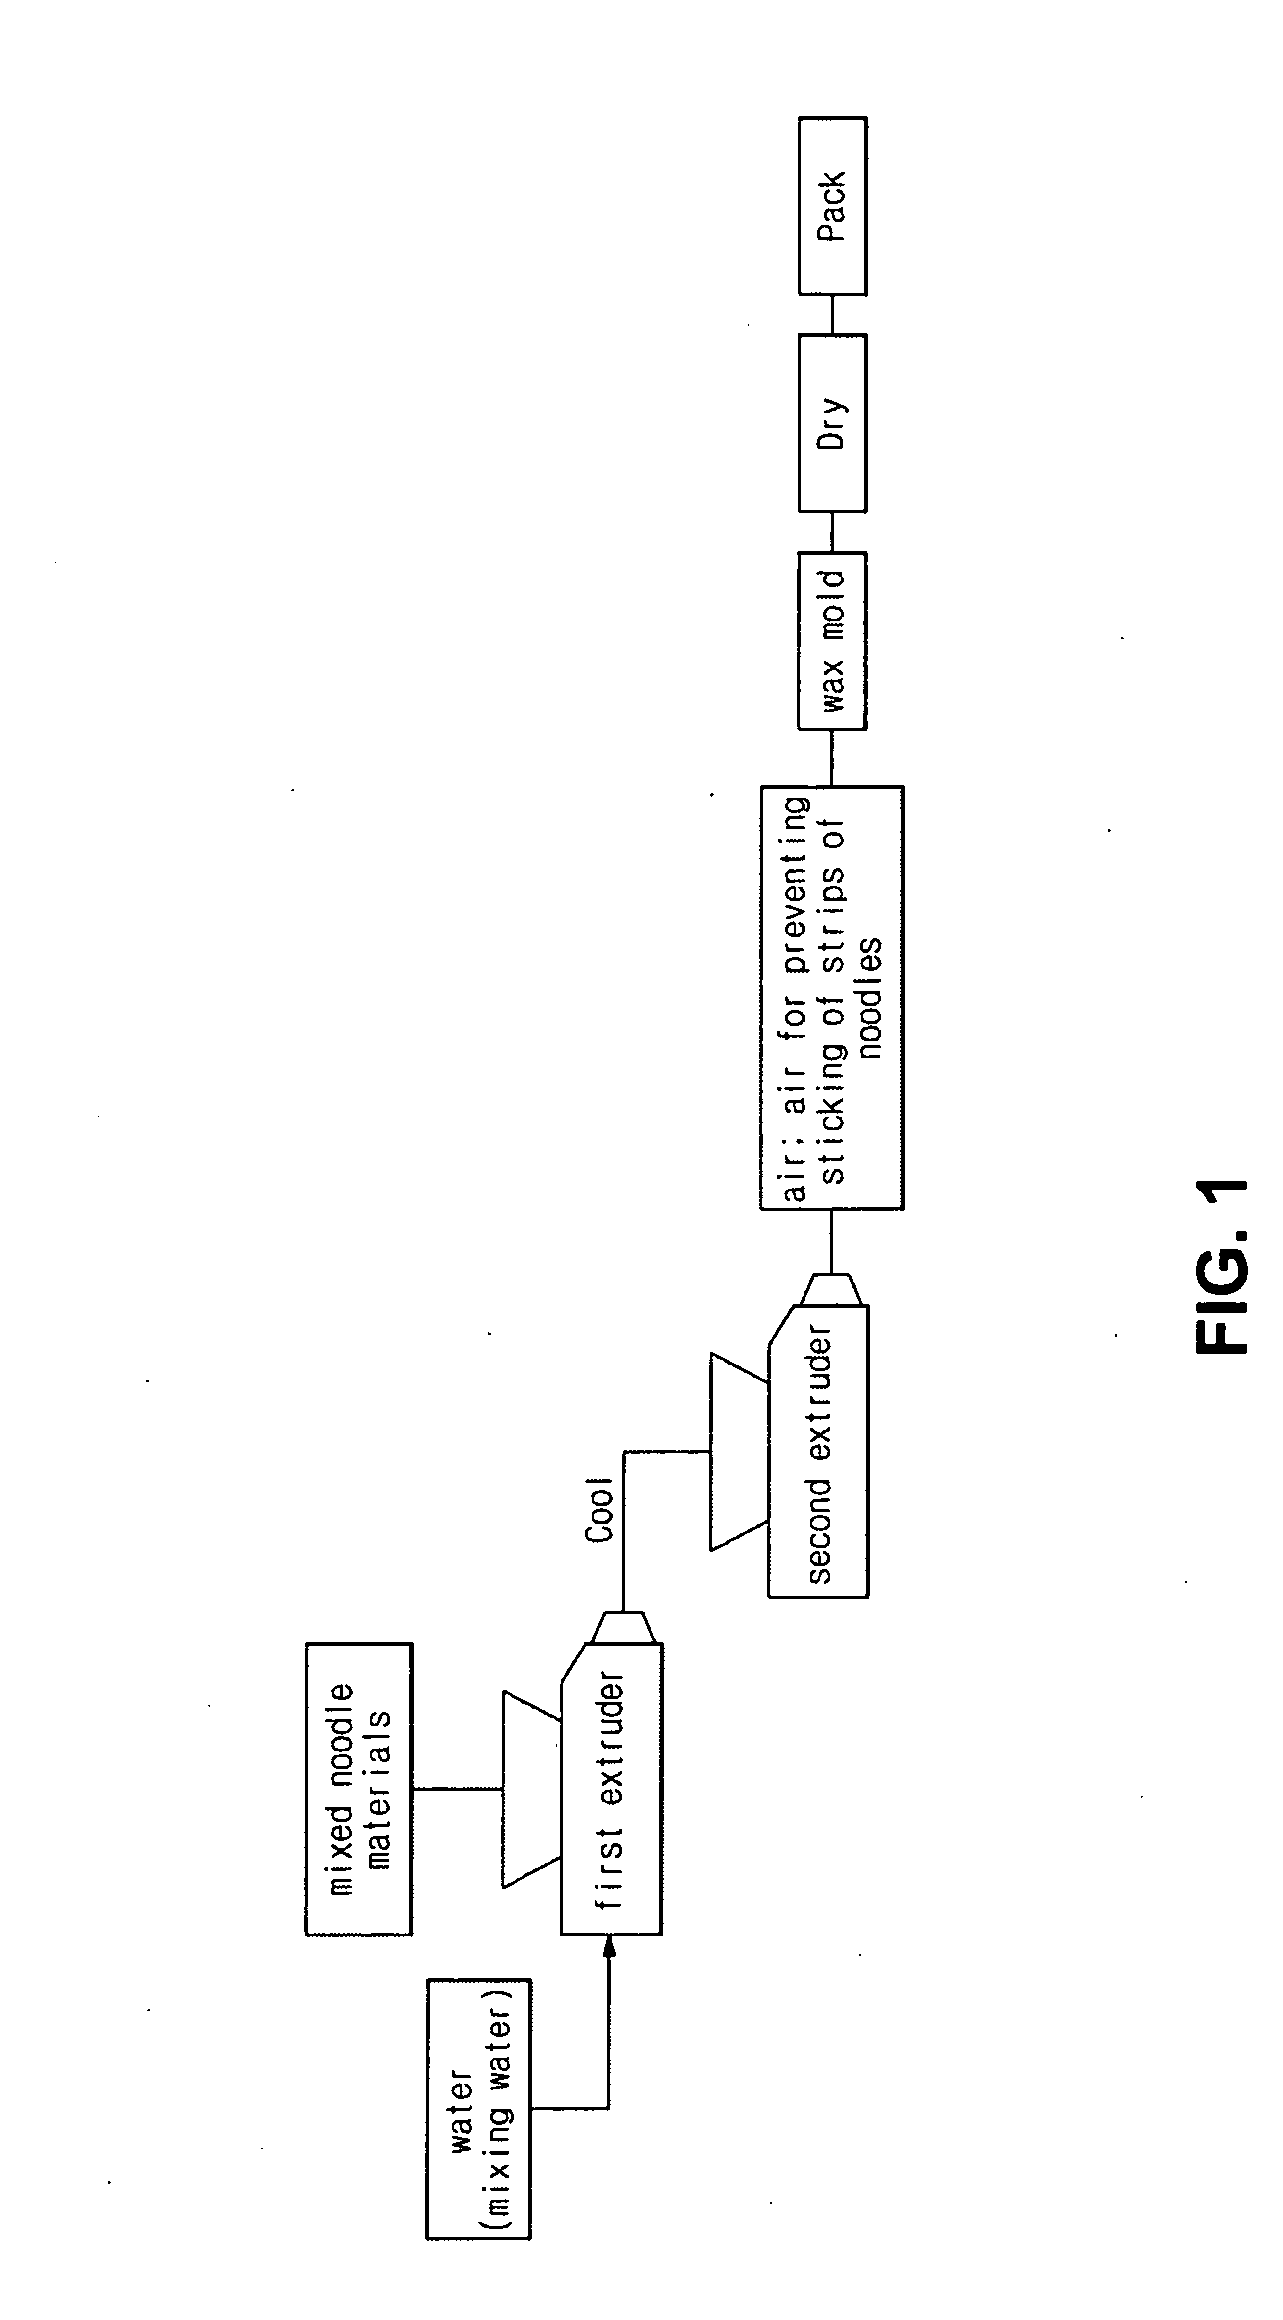 Method for producing extruded noodles